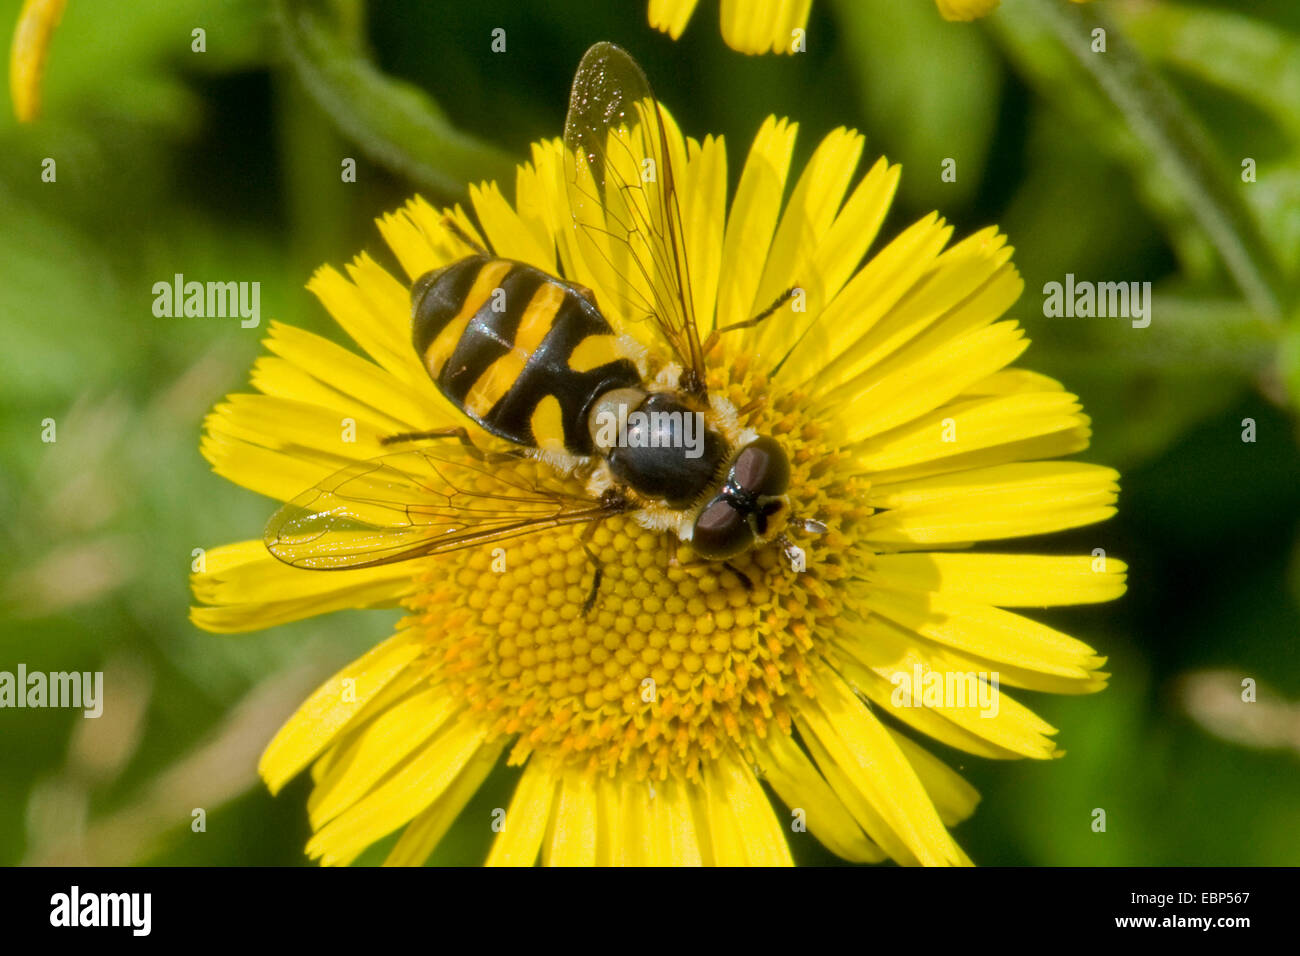 Broad Bodied Hoverfly (Didea fasciata), on yellow flower, Germany Stock Photo